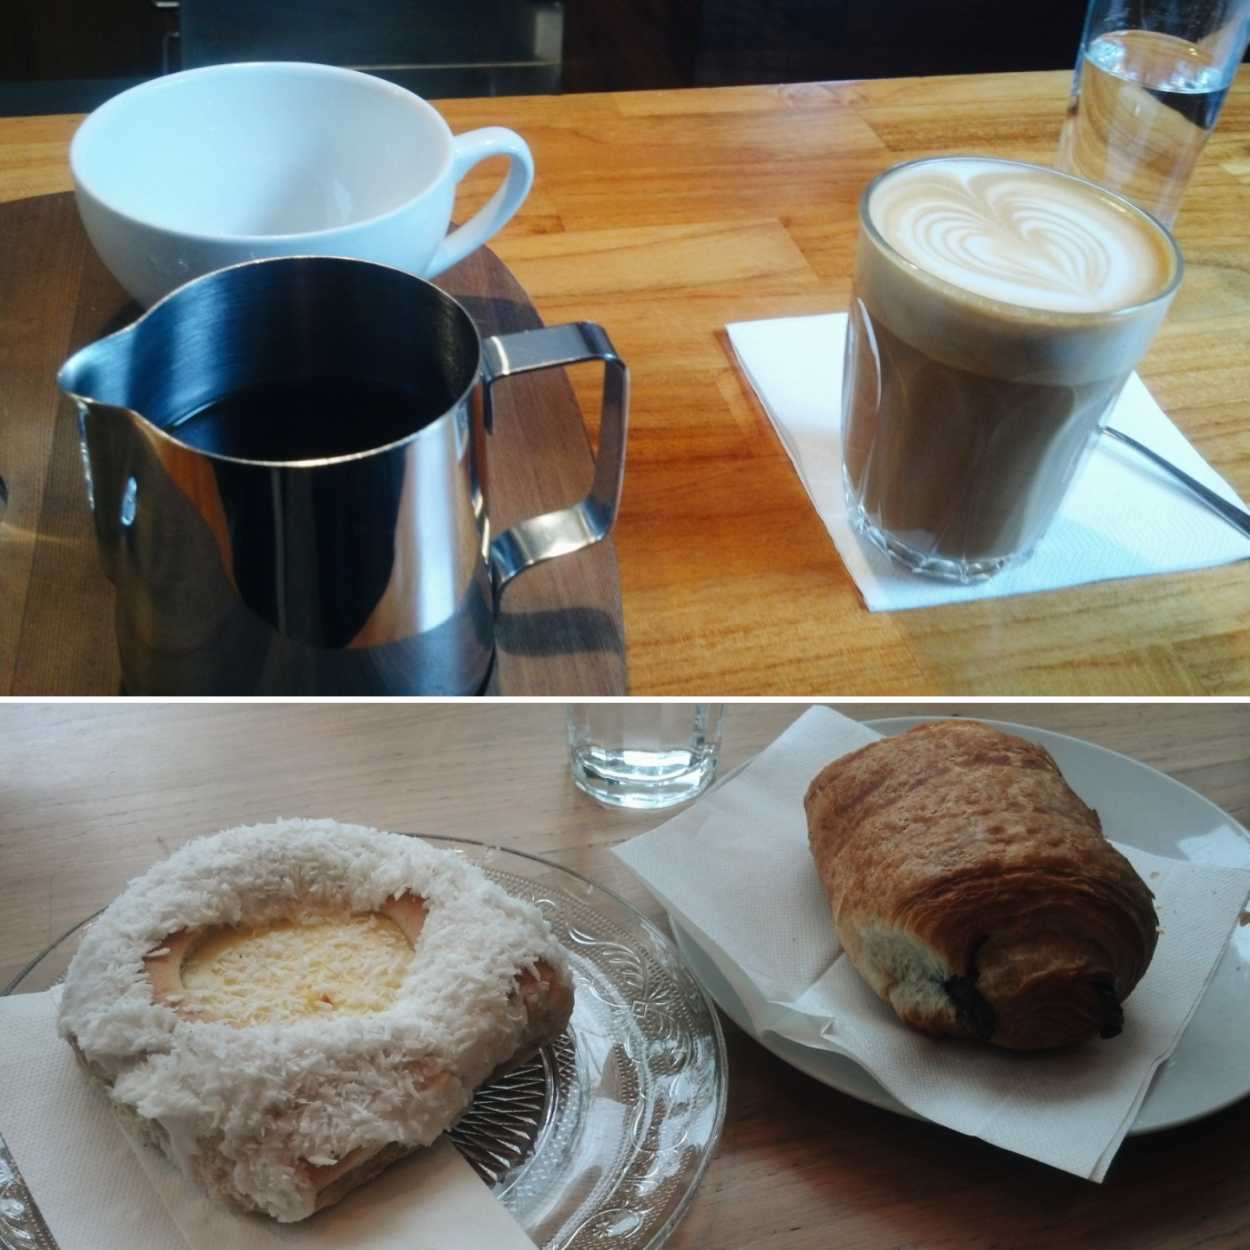 pastries and coffee in Norway